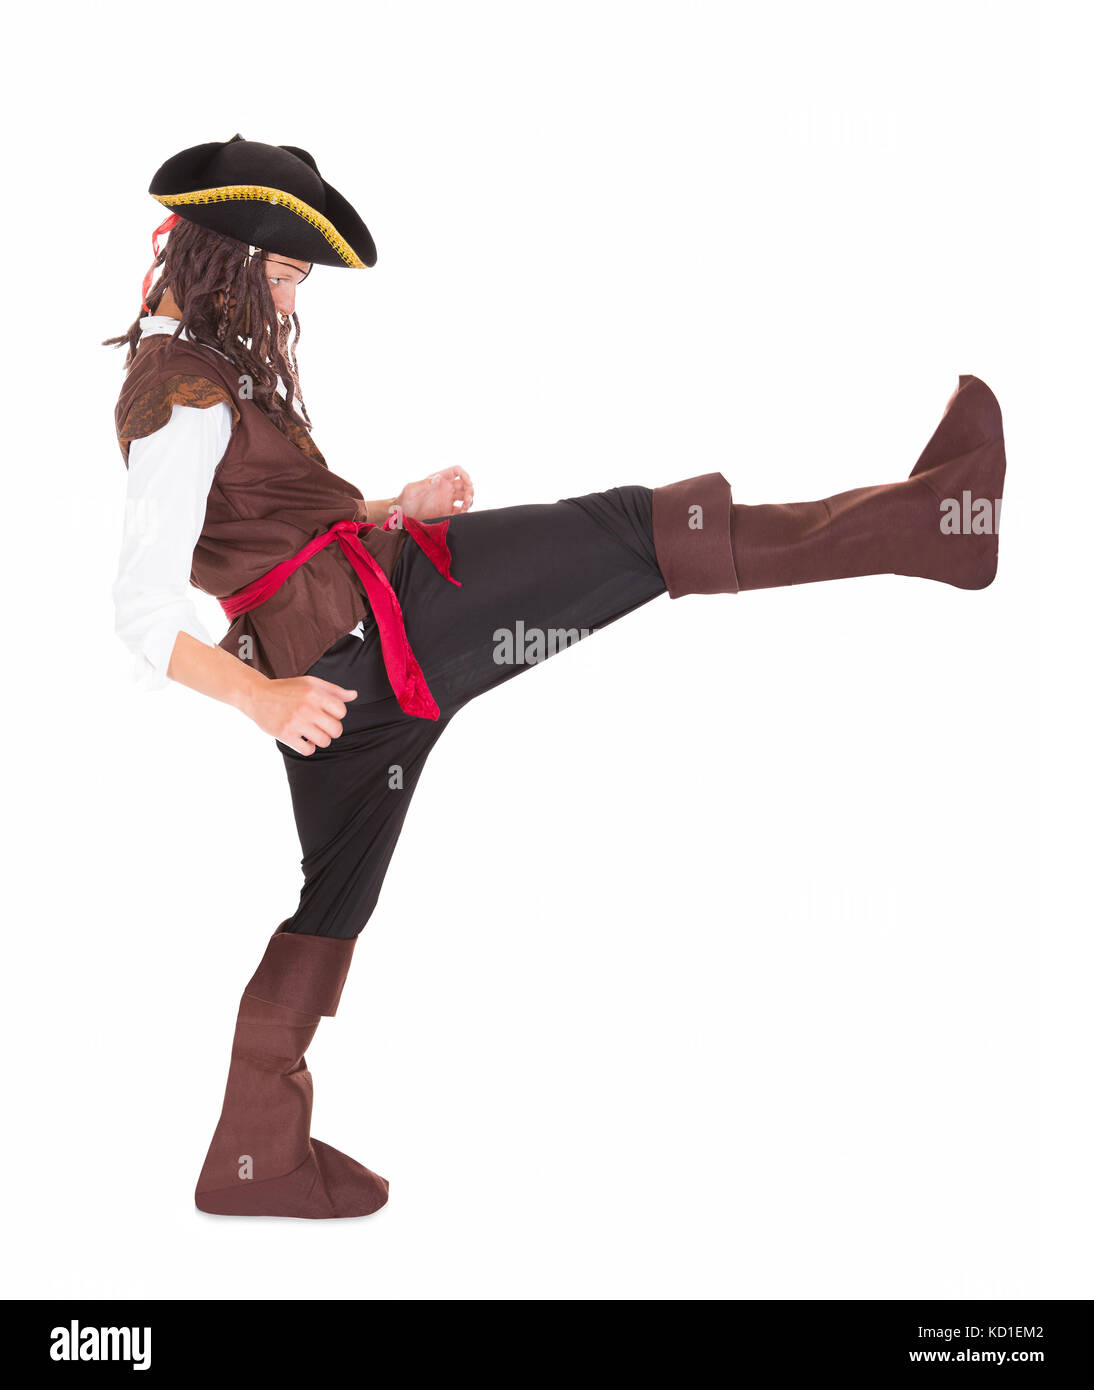 Portrait Of A Pirate Kicking Over White Background Stock Photo